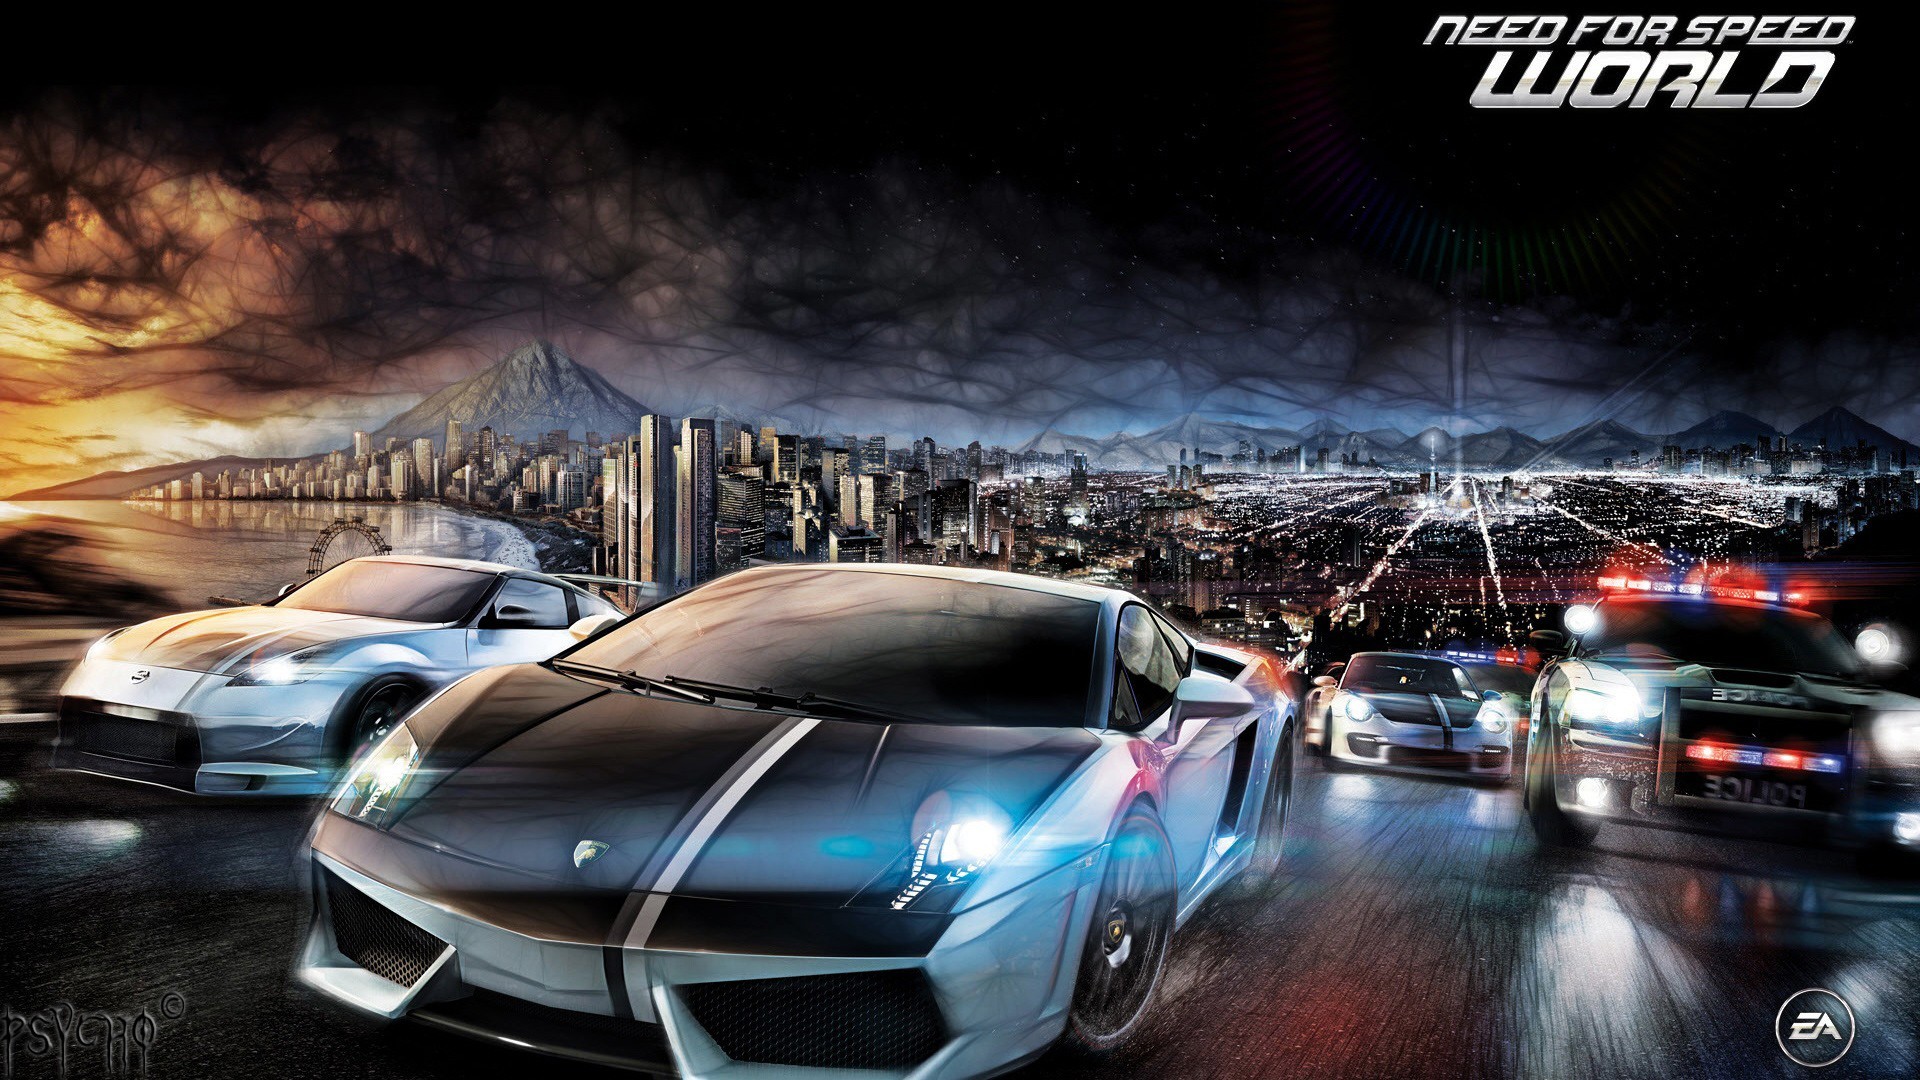 Need For Speed: World, Video Games Wallpaper